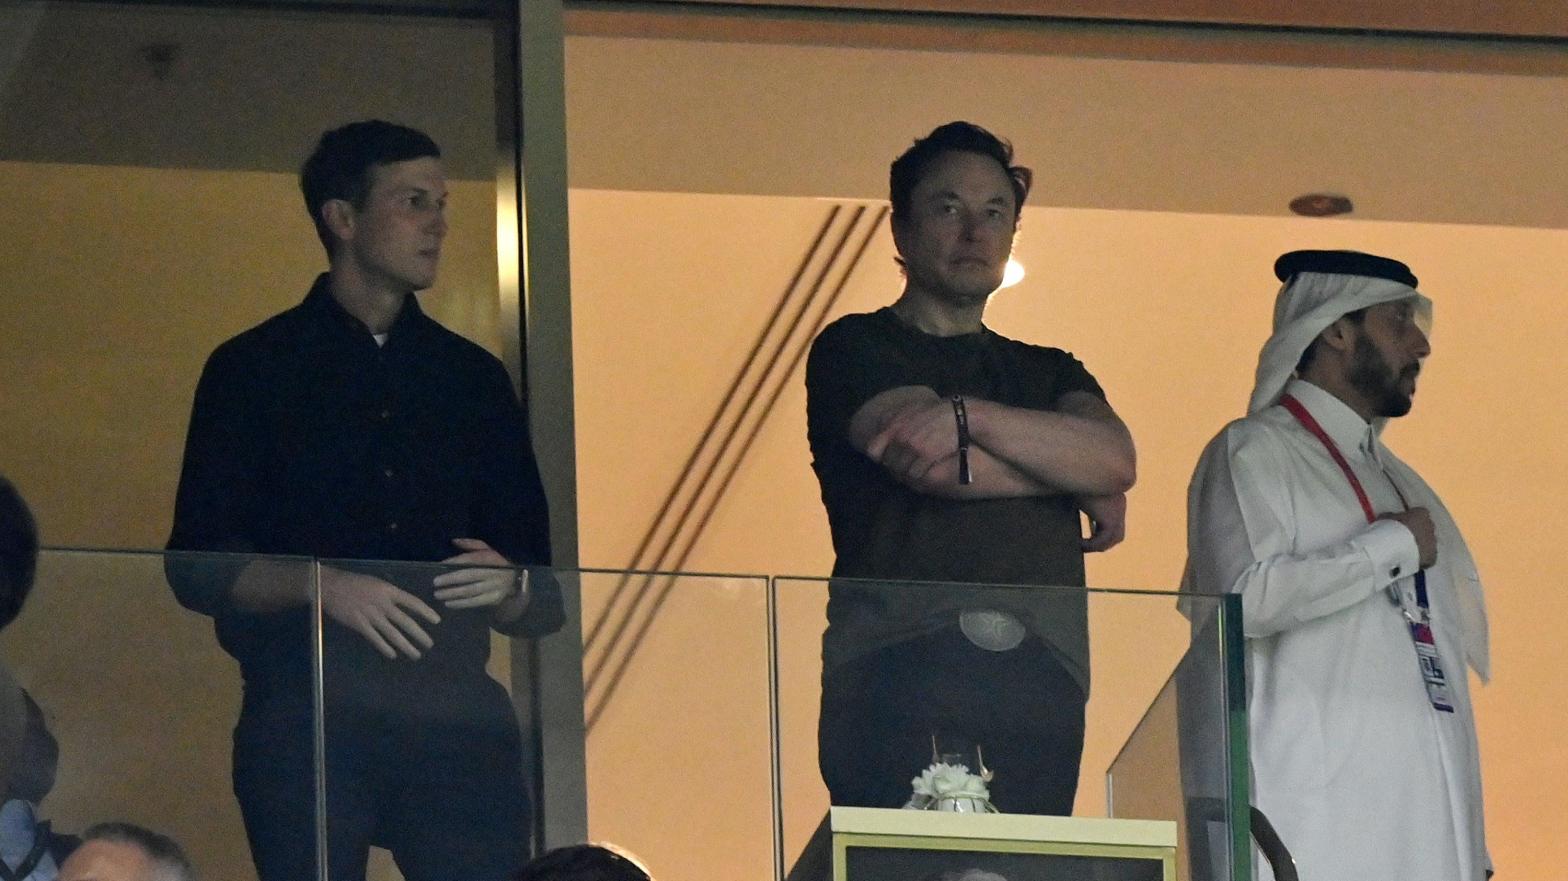 Jared Kushner and Elon Musk look on during the FIFA World Cup Qatar 2022 final match between Argentina and France. (Photo: Dan Mullan, Getty Images)